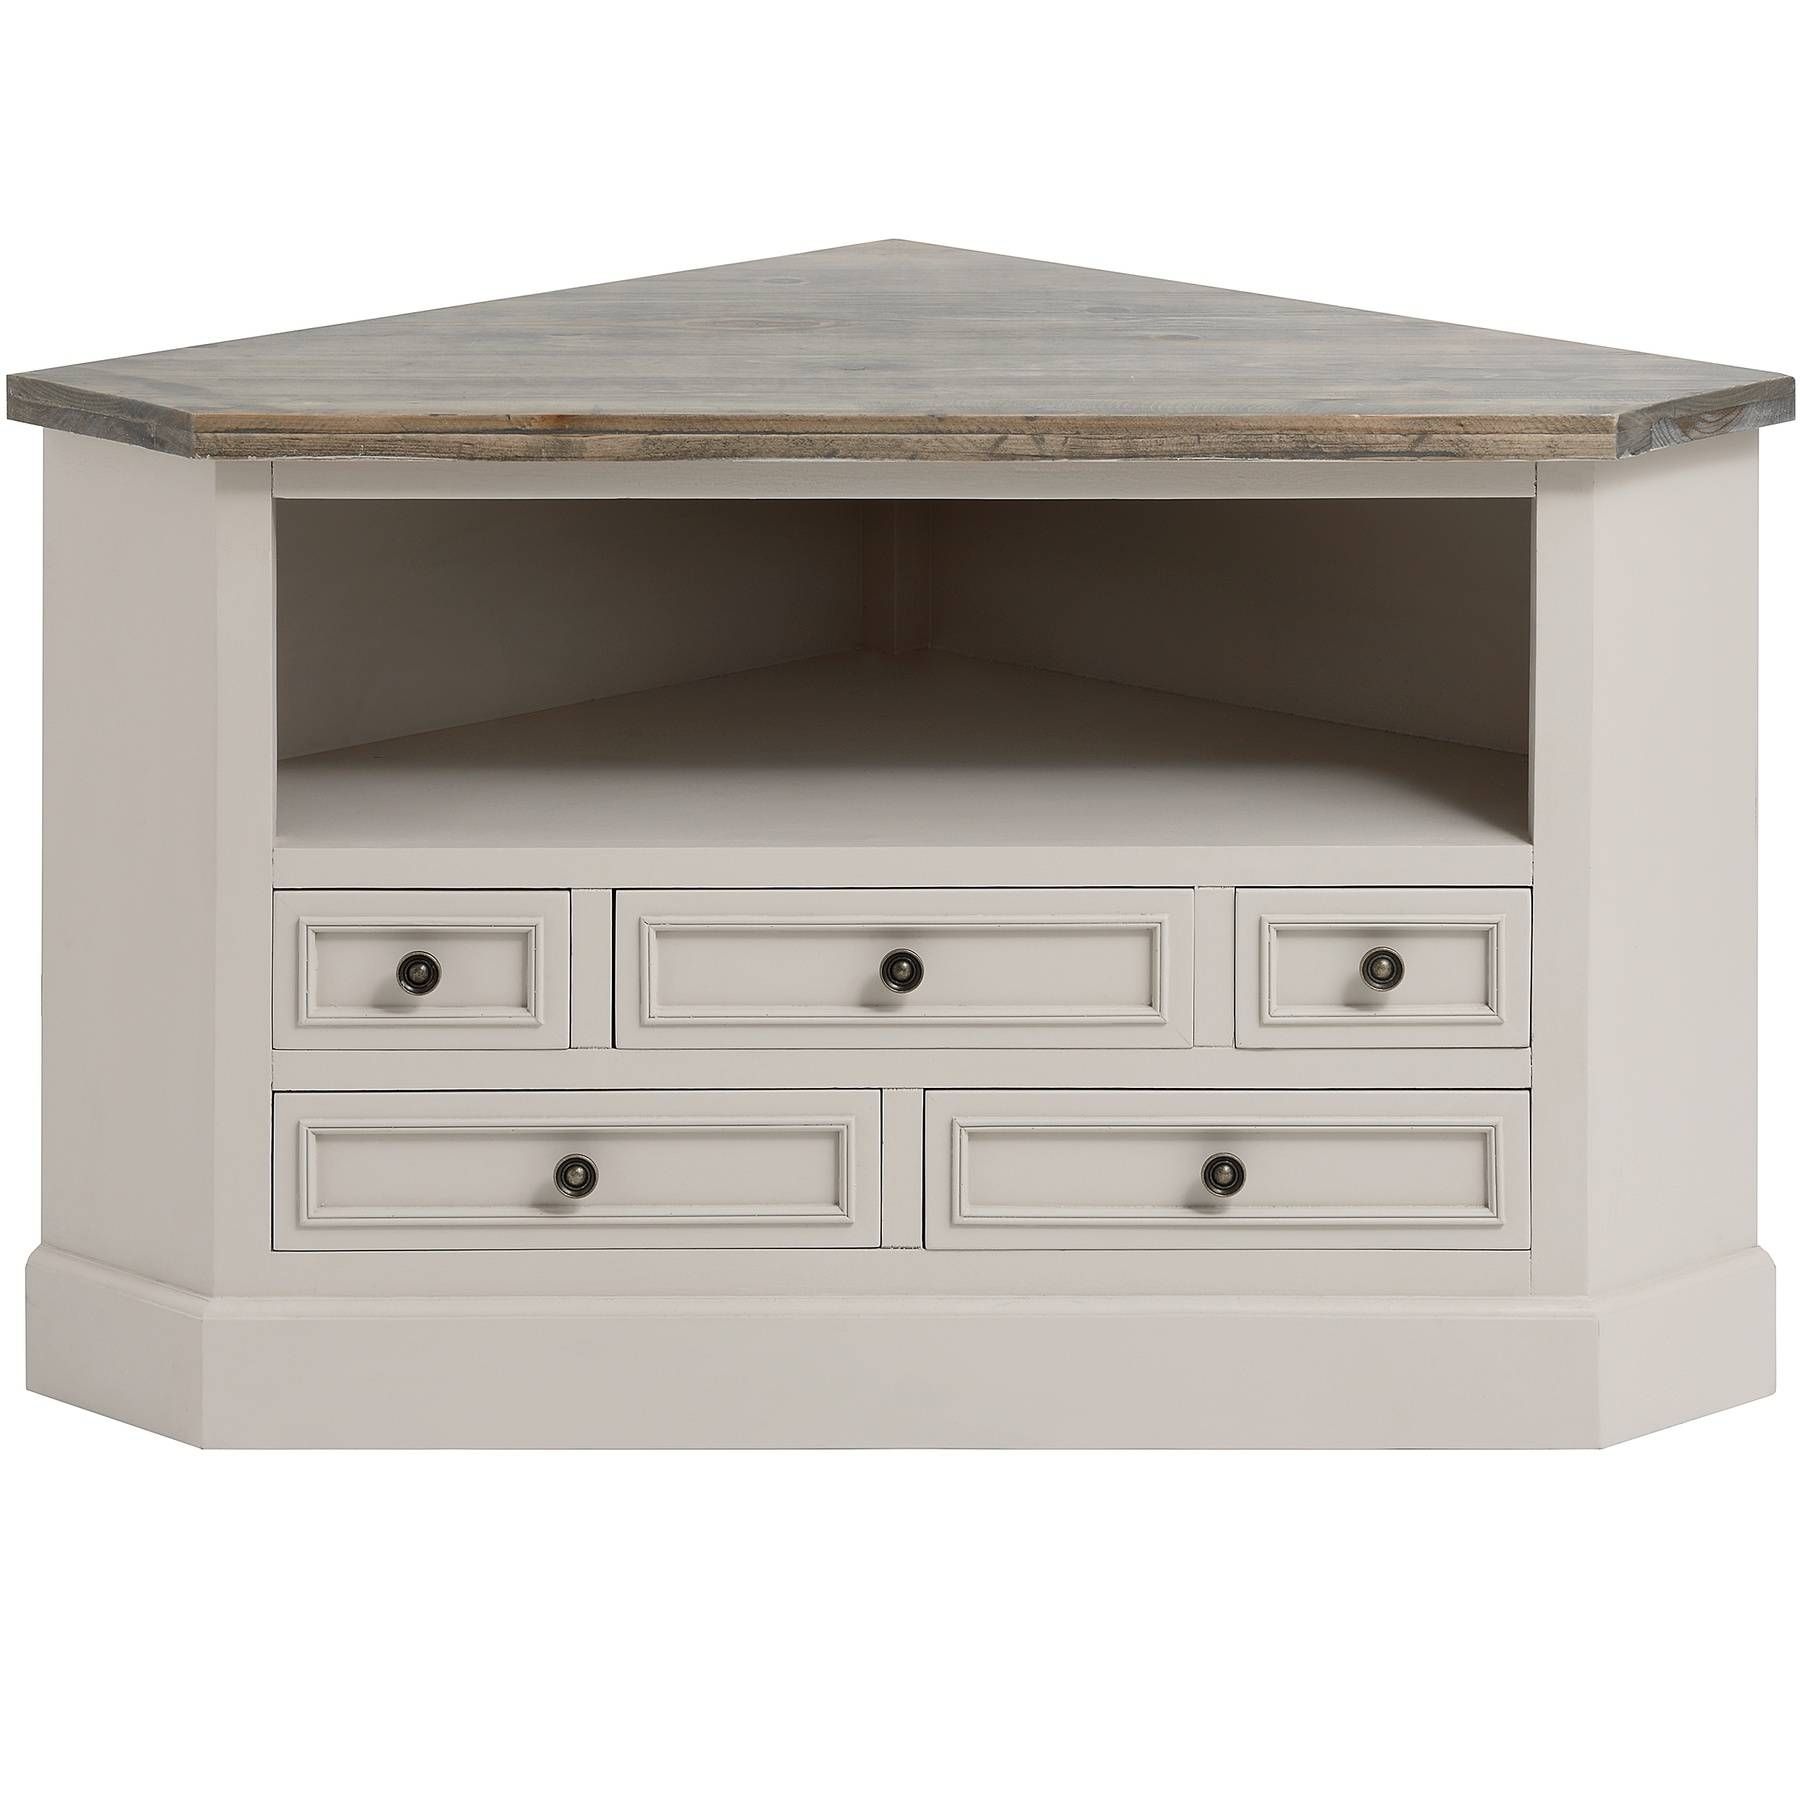 The Studley Collection Corner Tv Unit | From Baytree Interiors Pertaining To Tv Cabinets Corner Units (View 3 of 15)